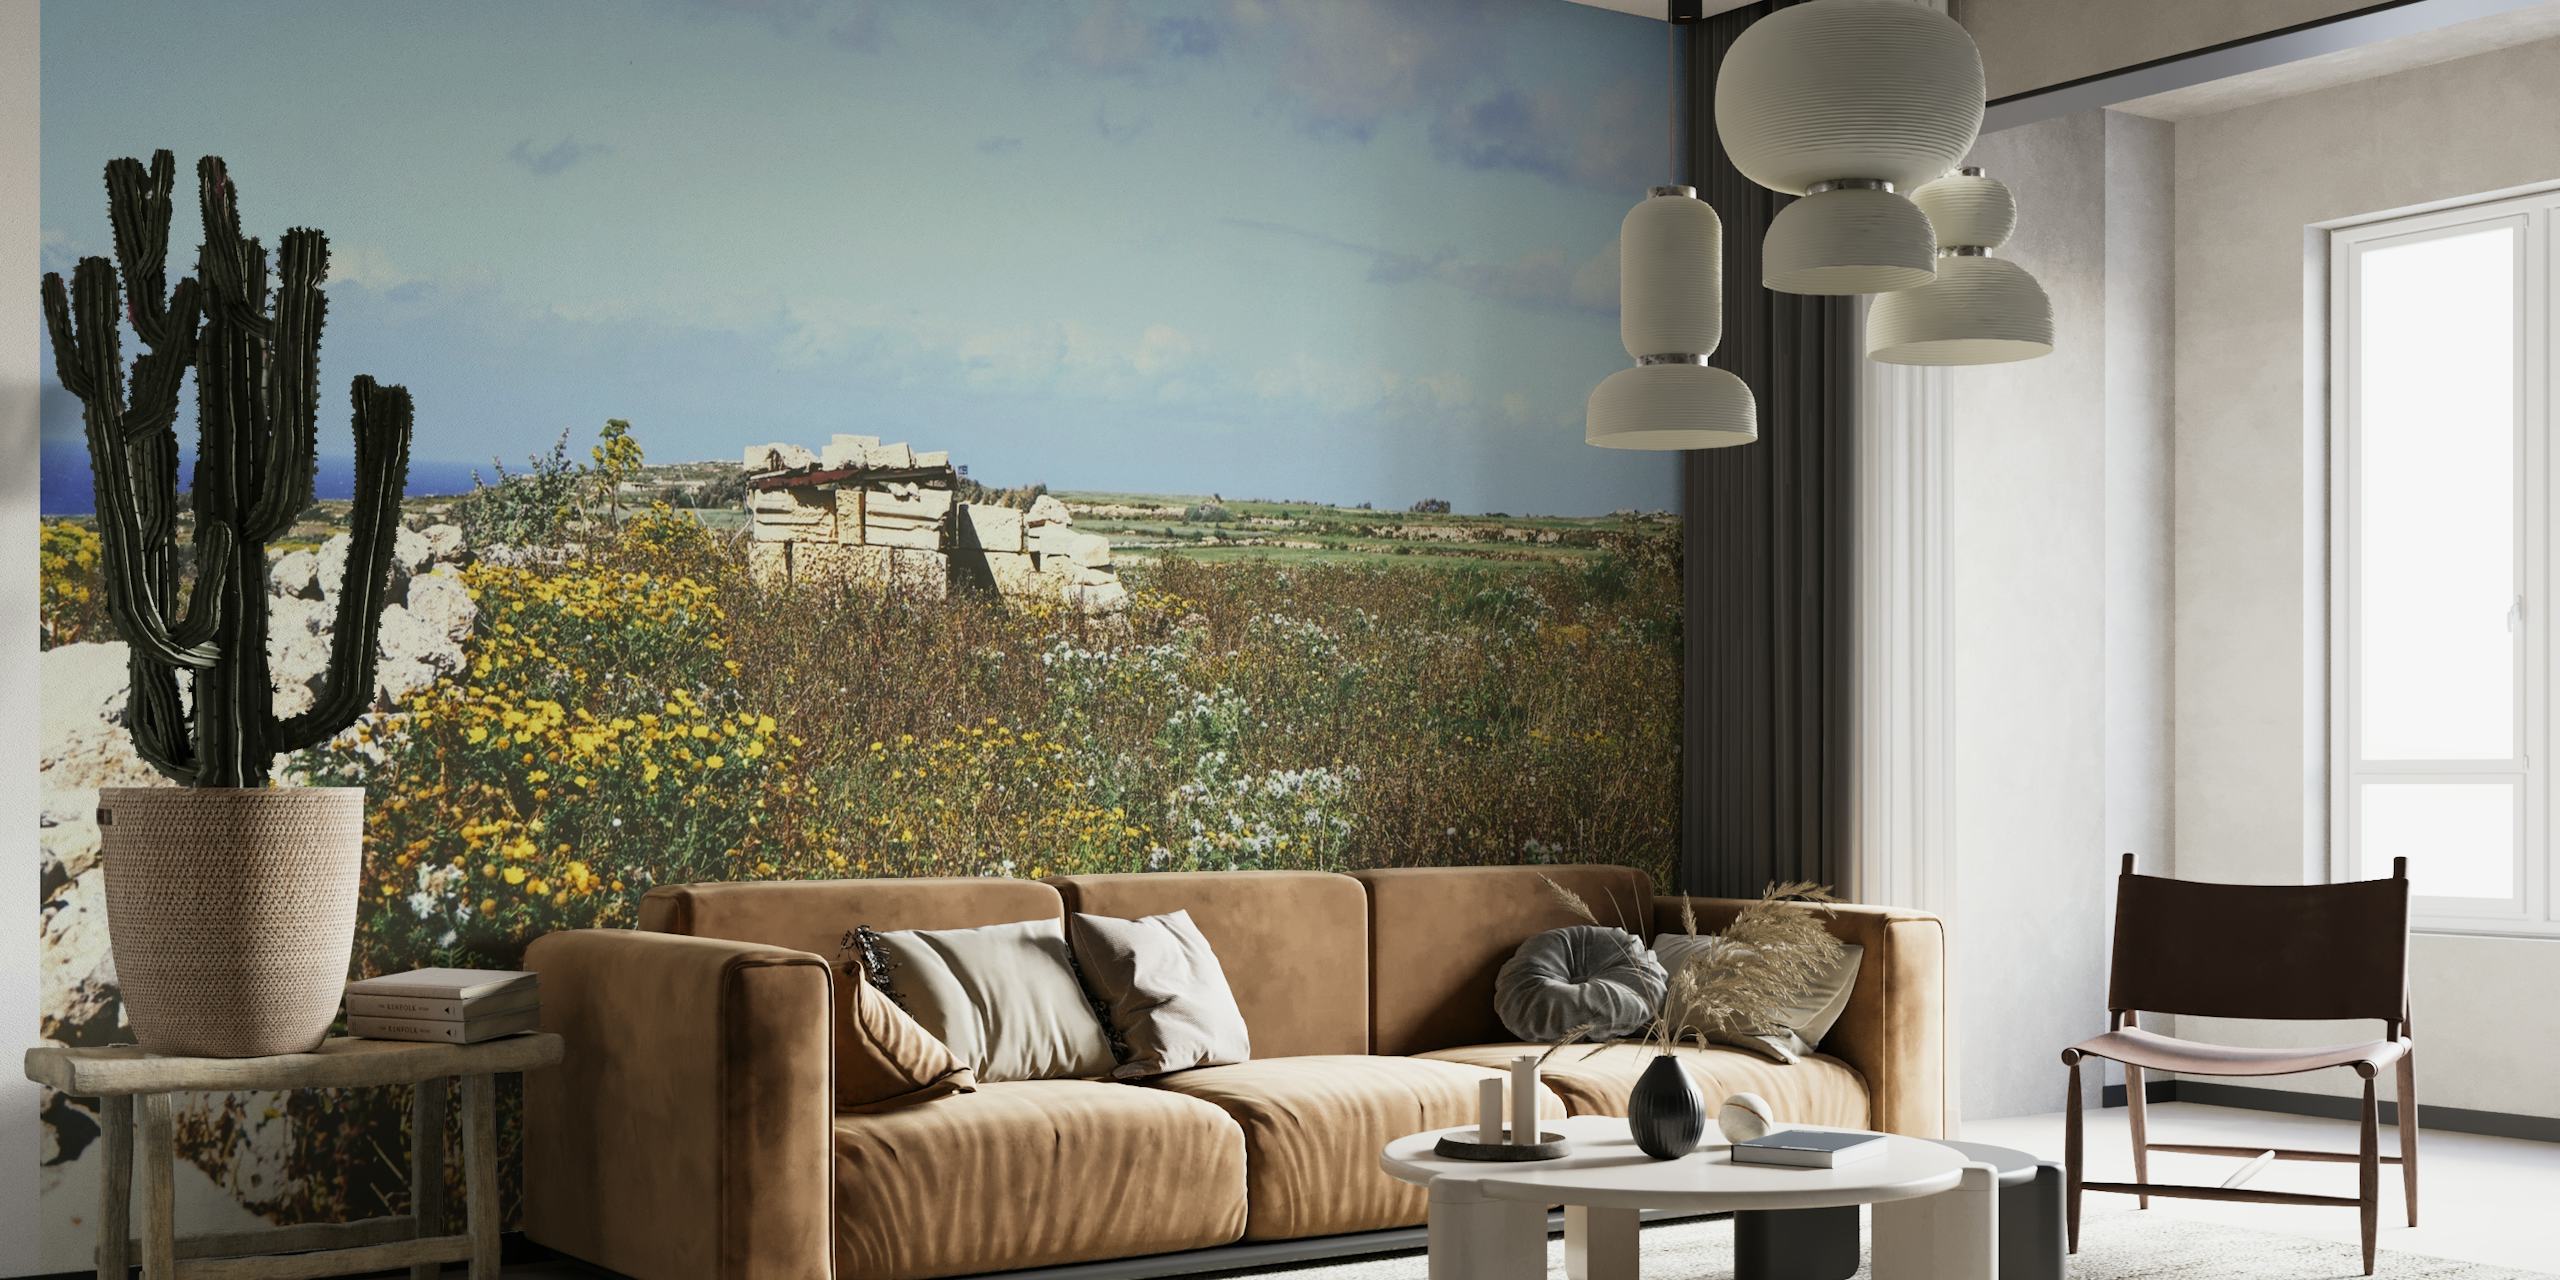 A picturesque wall mural of a flower field with a house in the distance under a clear sky.